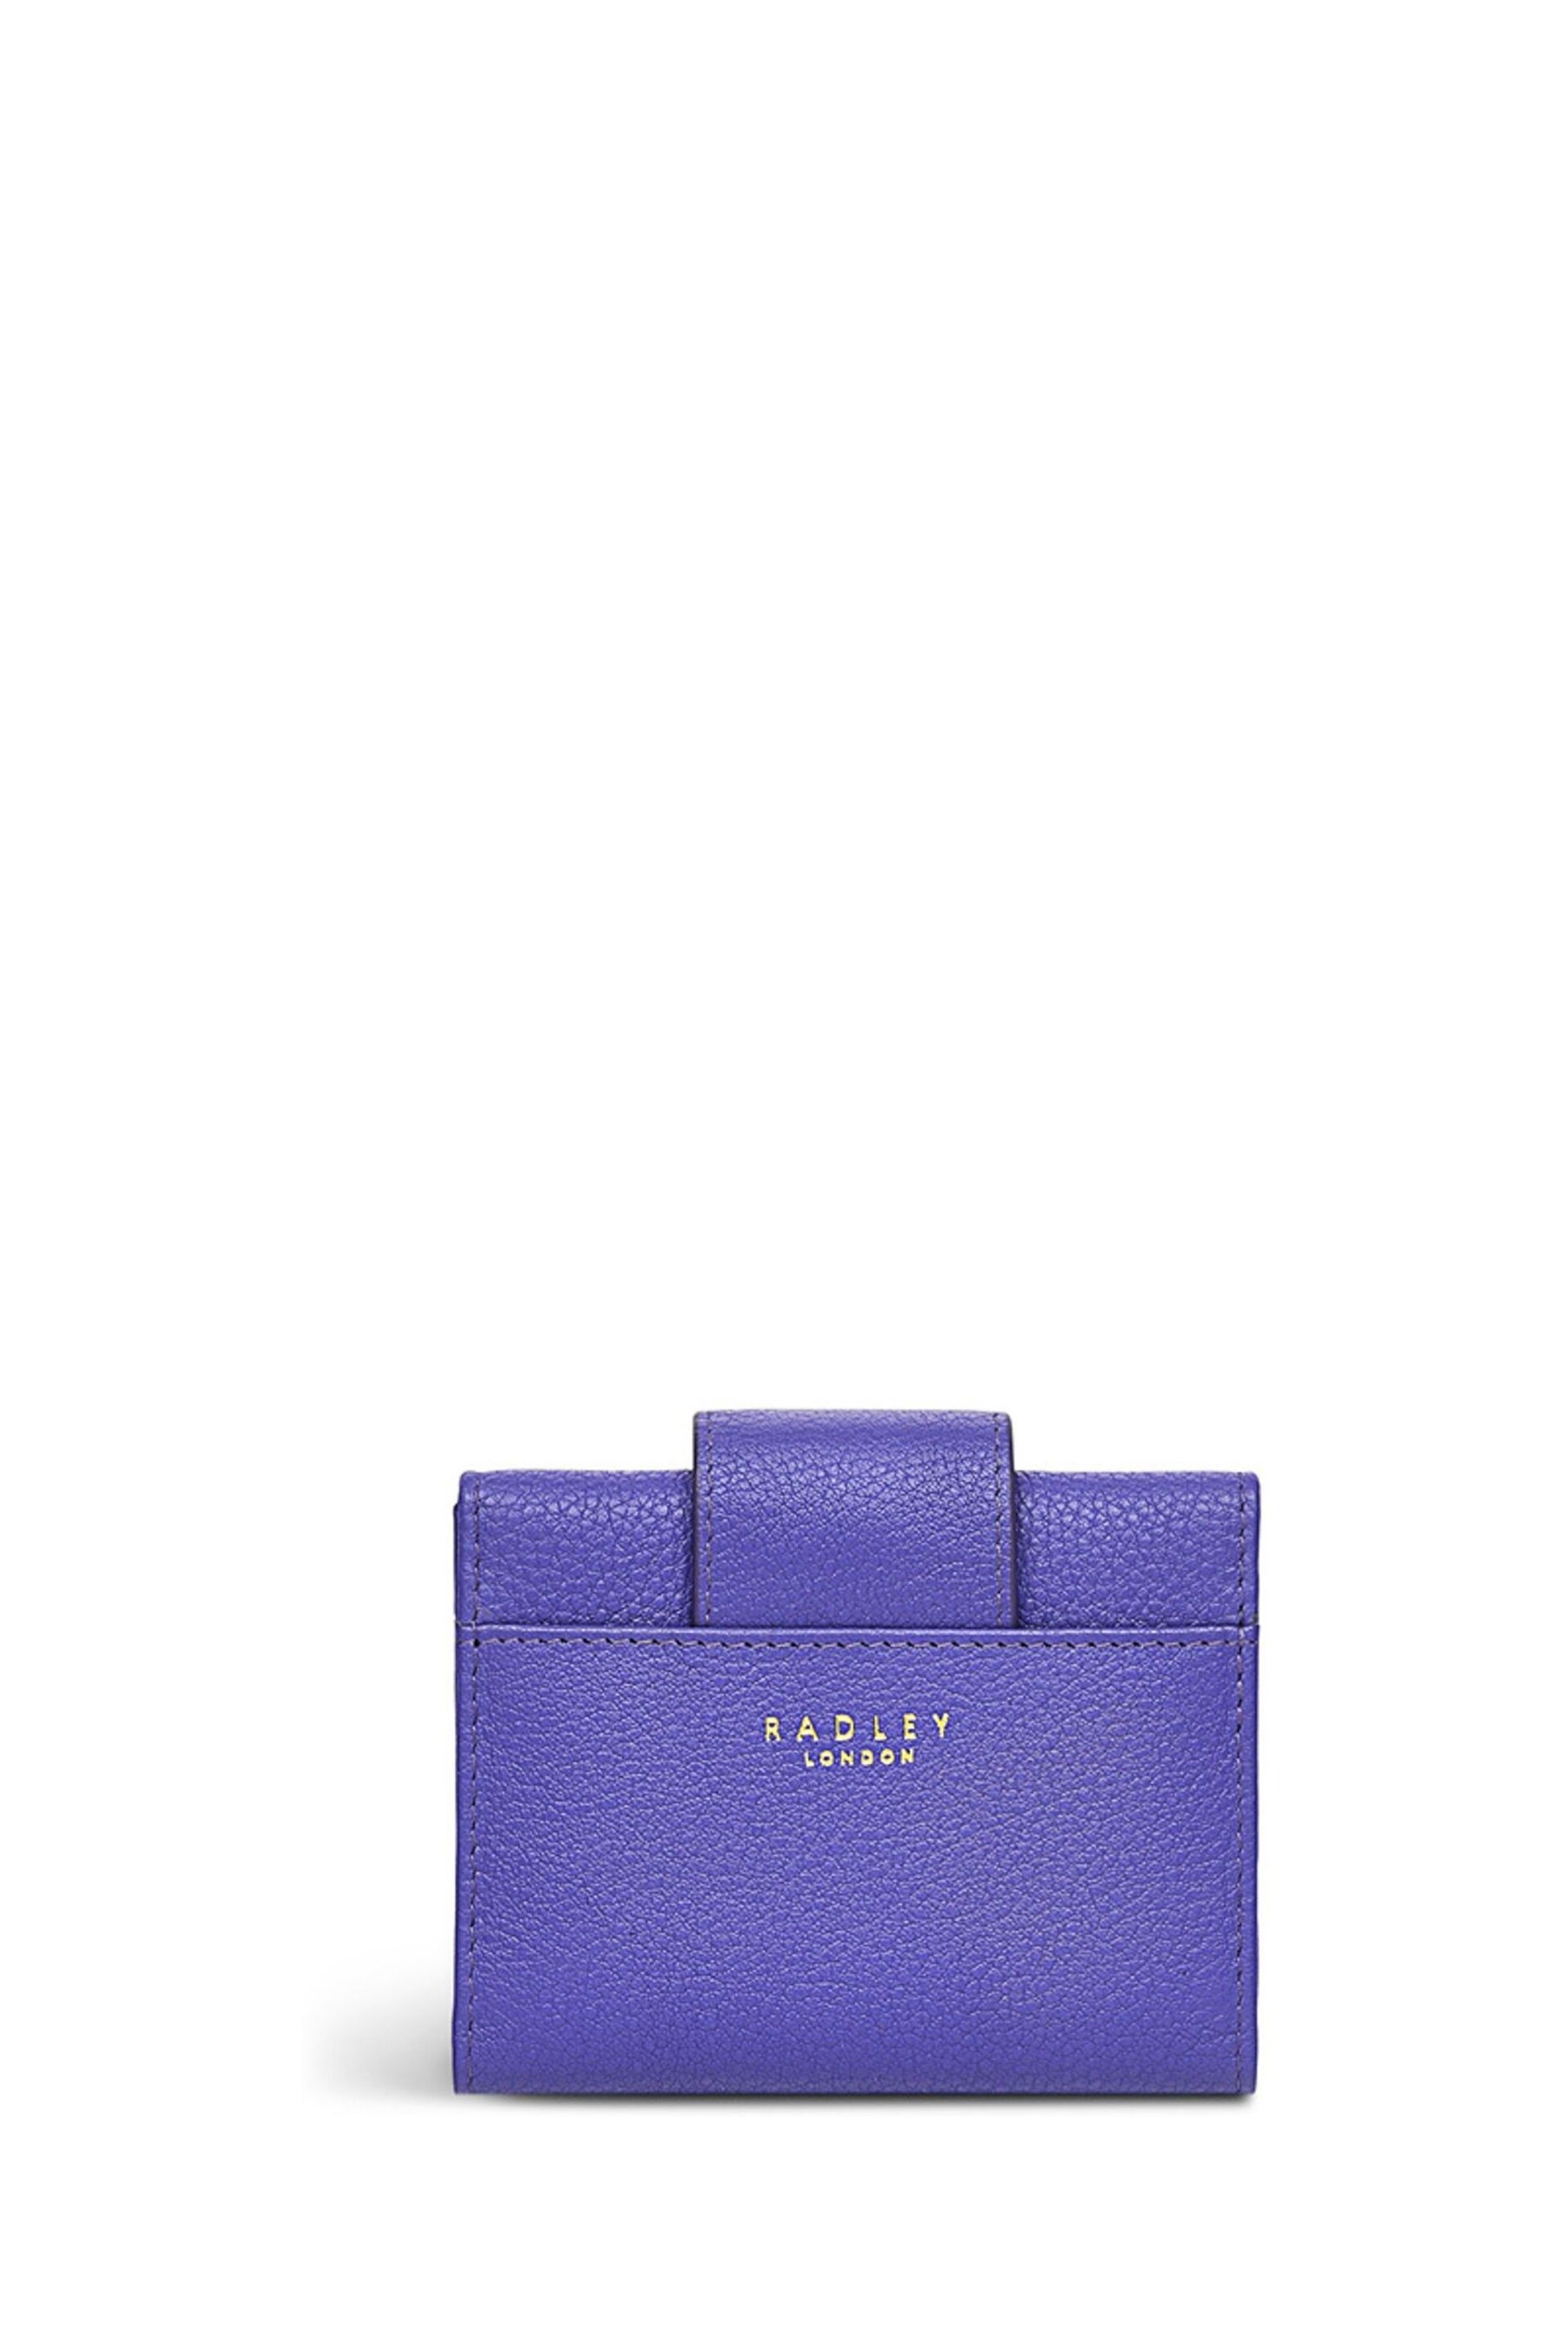 Radley London Small Purple Mill Road Trifold Purse - Image 2 of 4